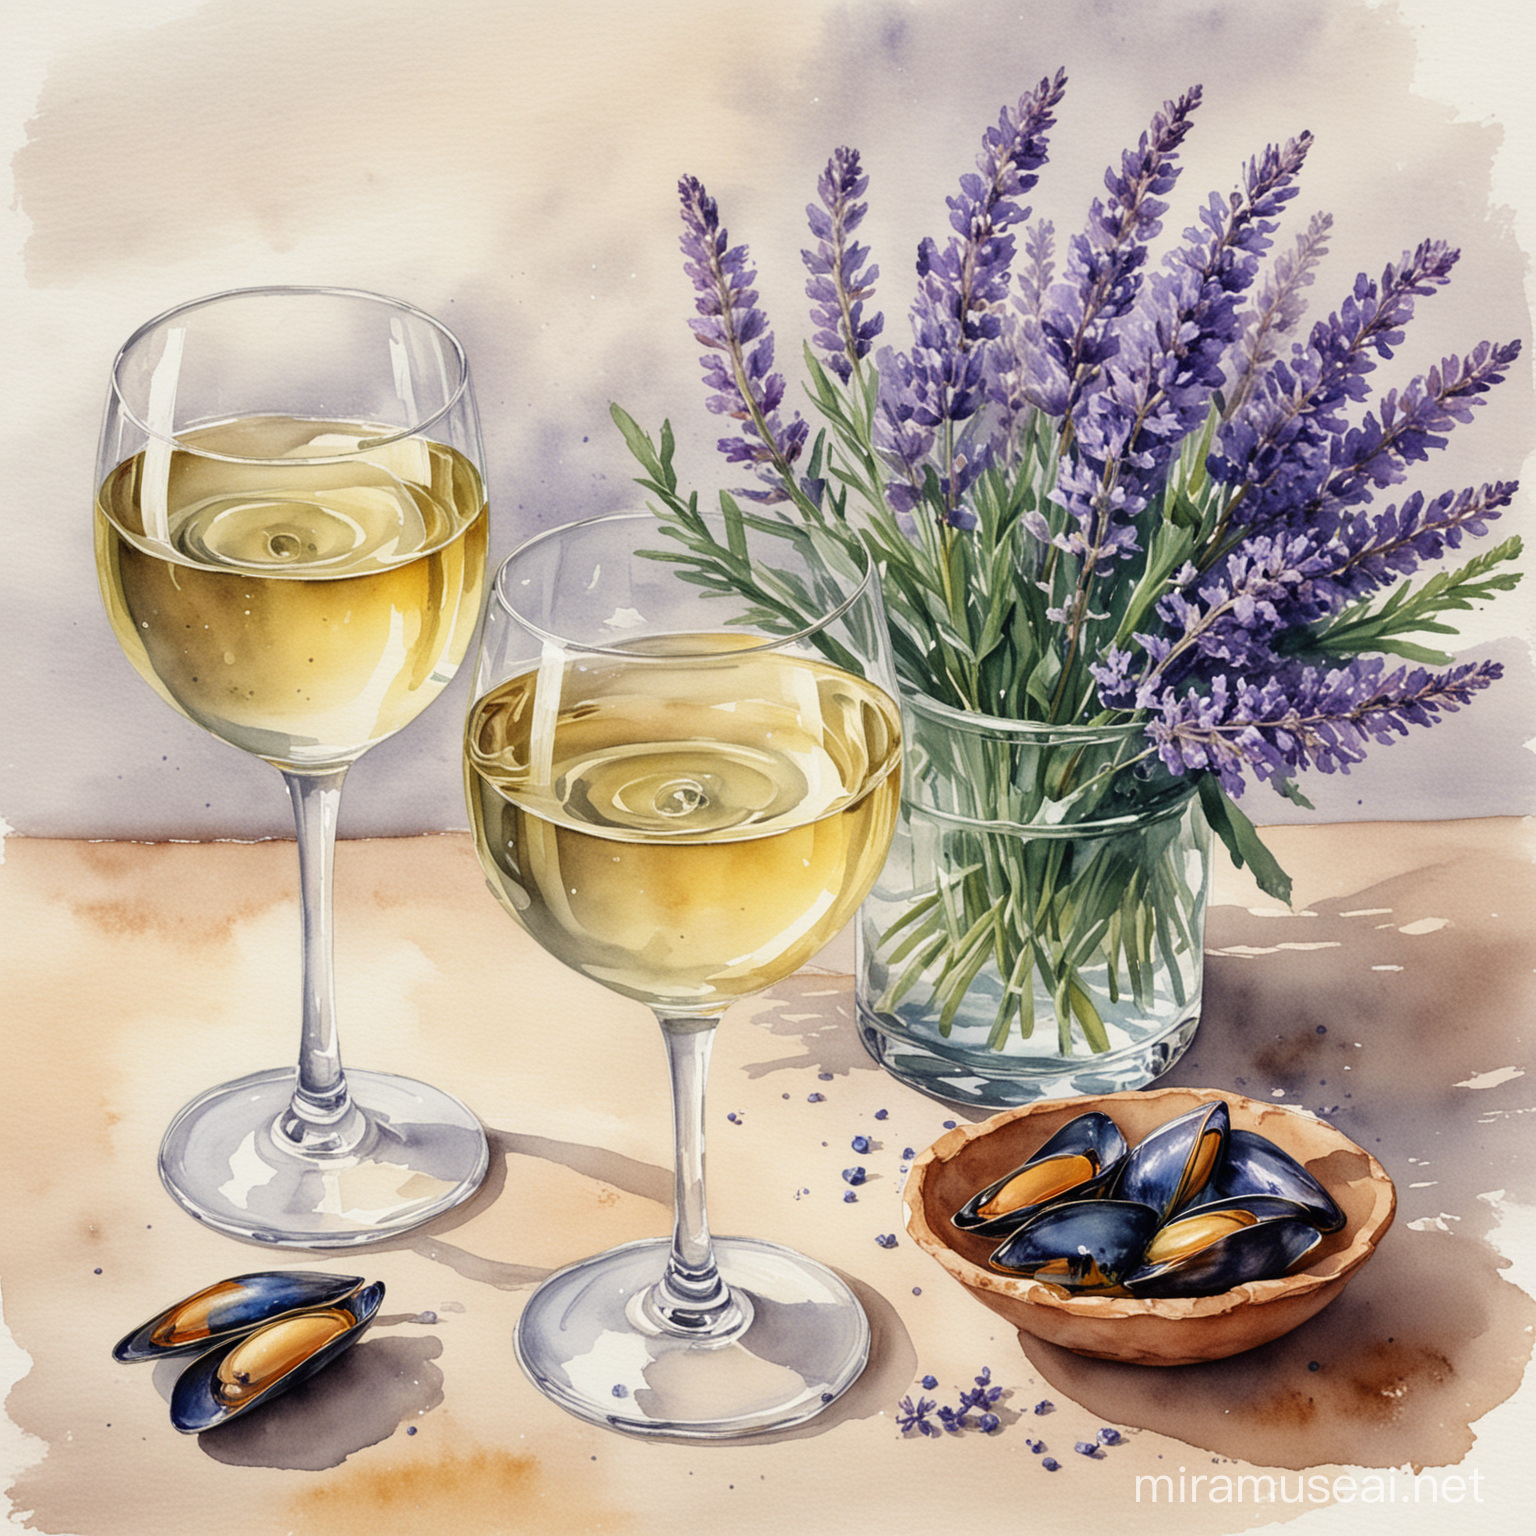 Watercolor Painting of White Wine Mussels and Lavender Bouquet